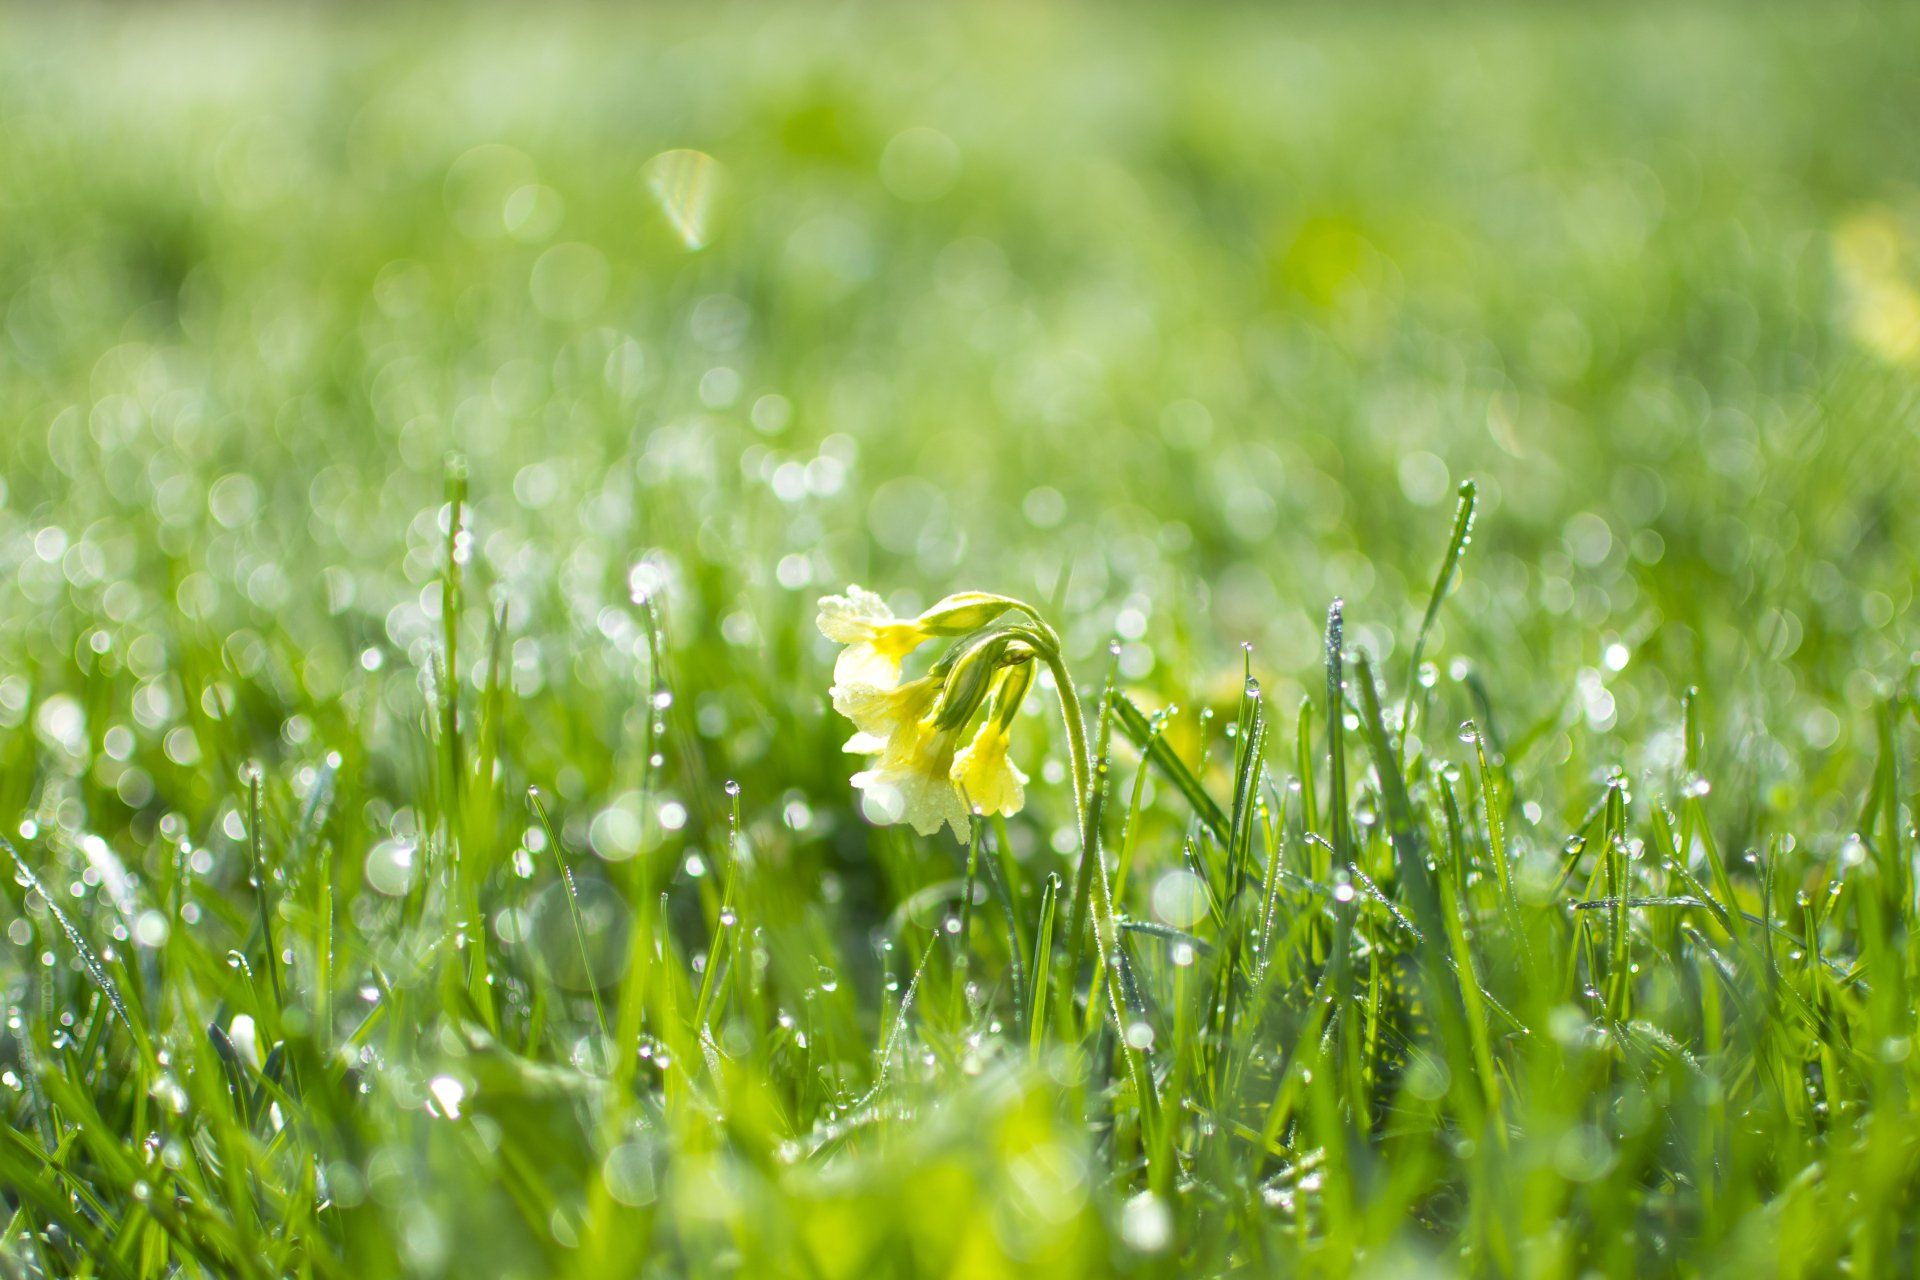 spring yellow flower is growing in the grass with water drops on it.